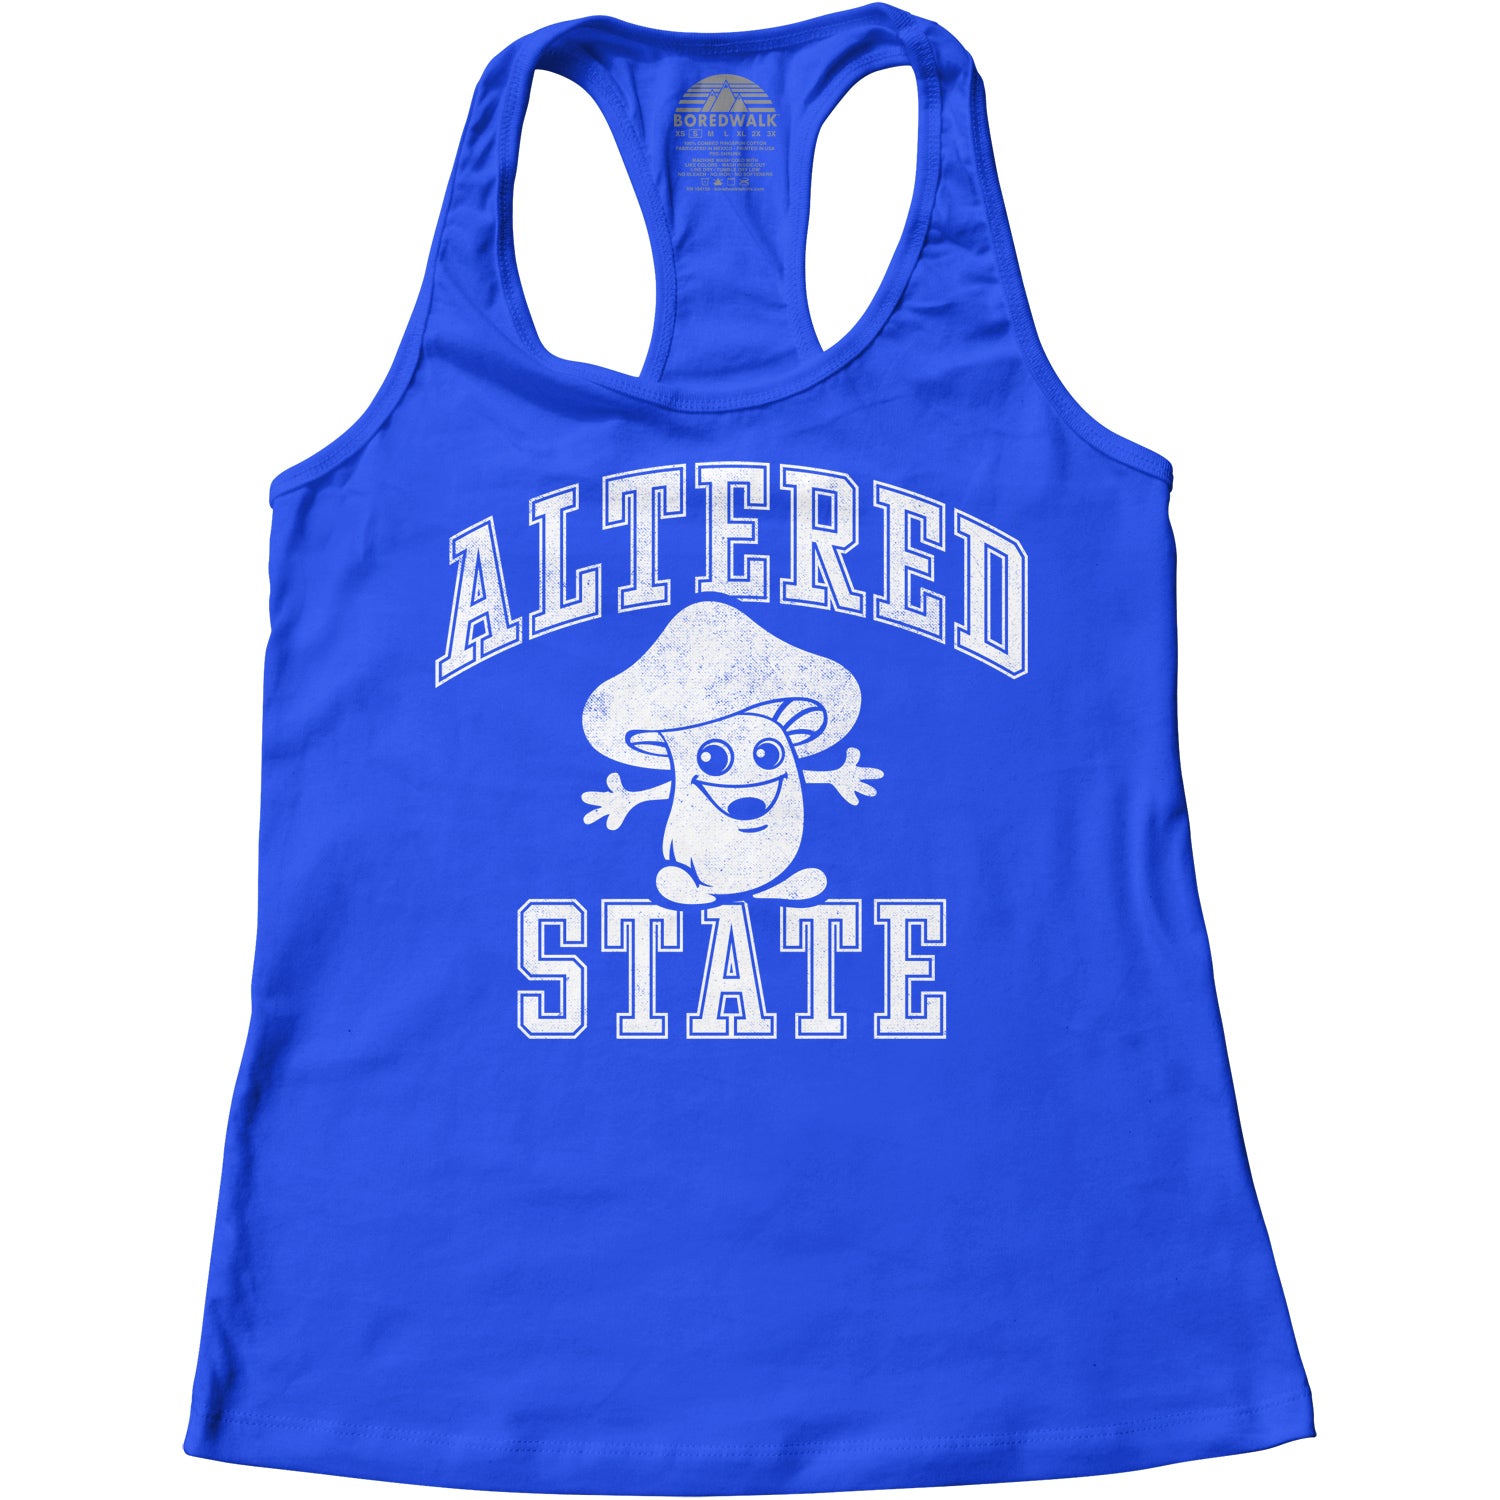 Women's Altered State Racerback Tank Top